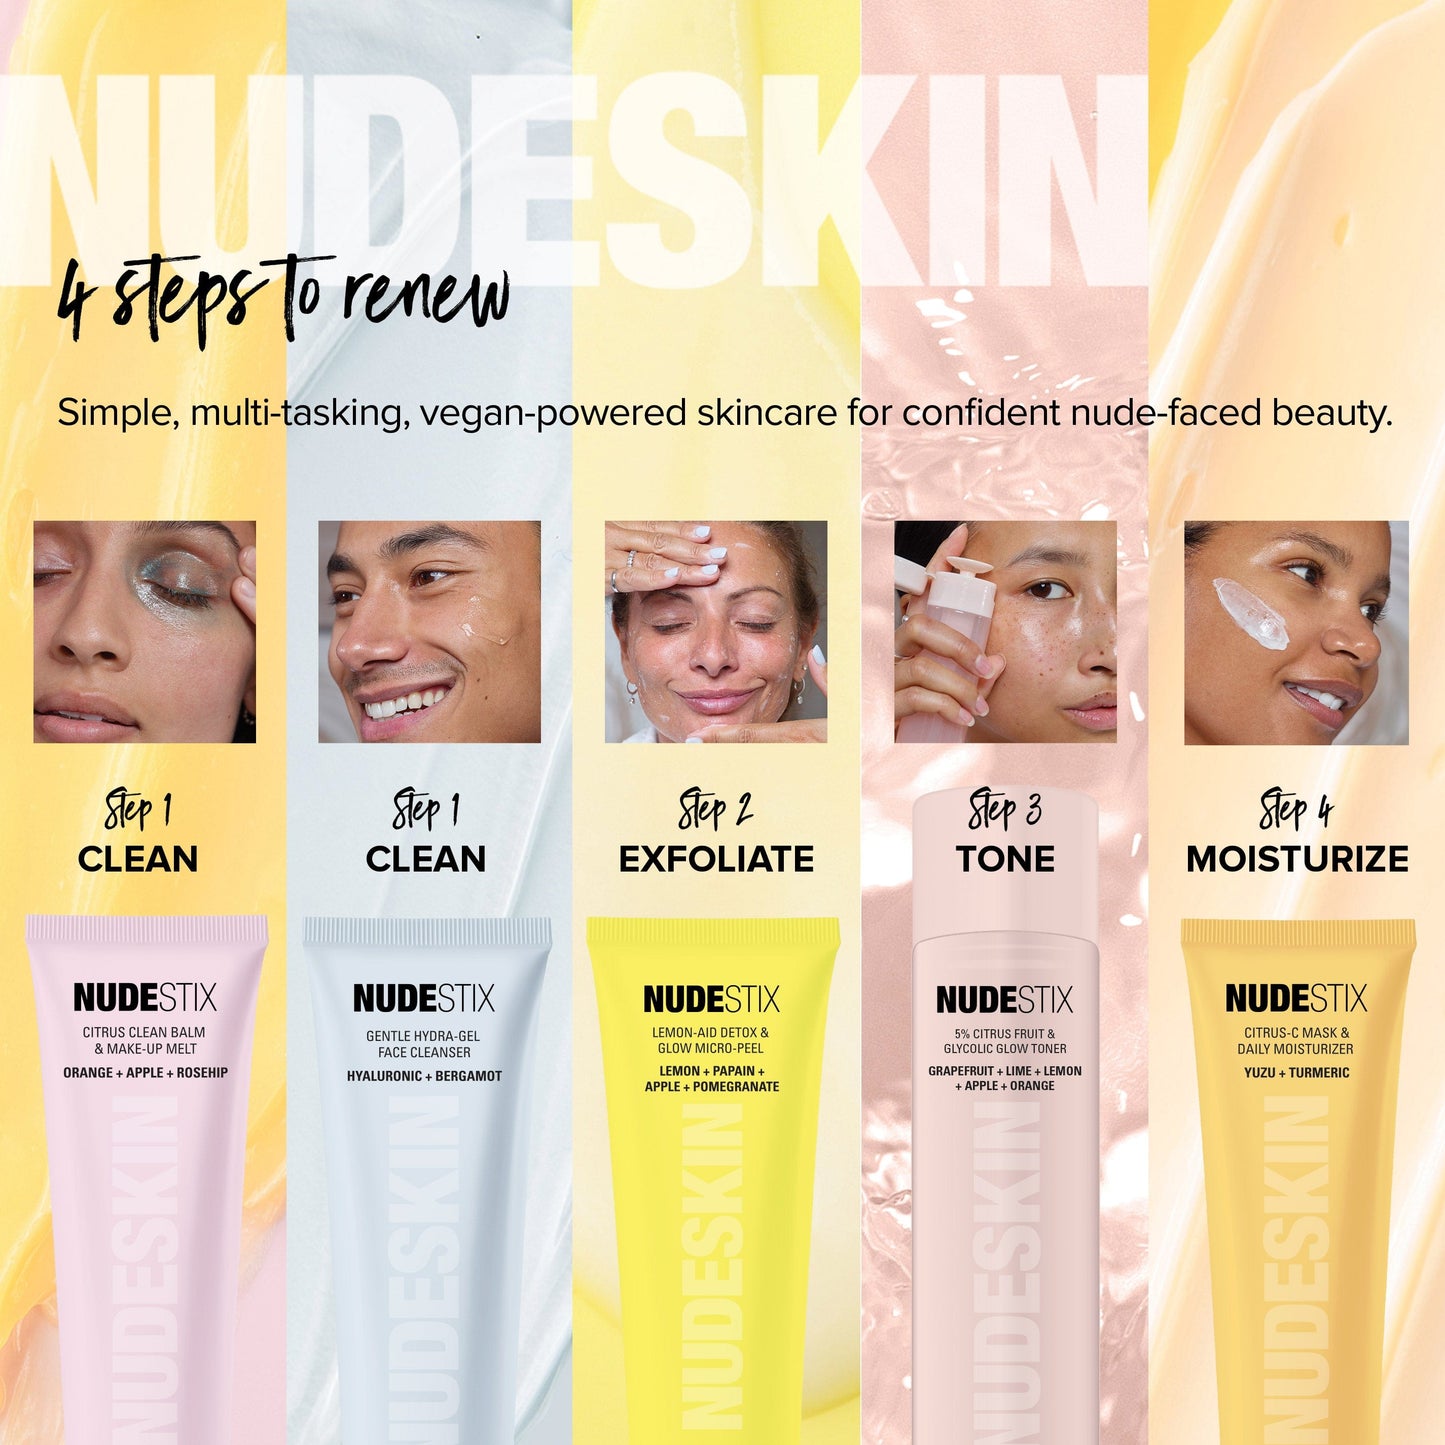 Nudeskin step 3: 5% Citrus Fruit & Glycolic Glow Toner and other products